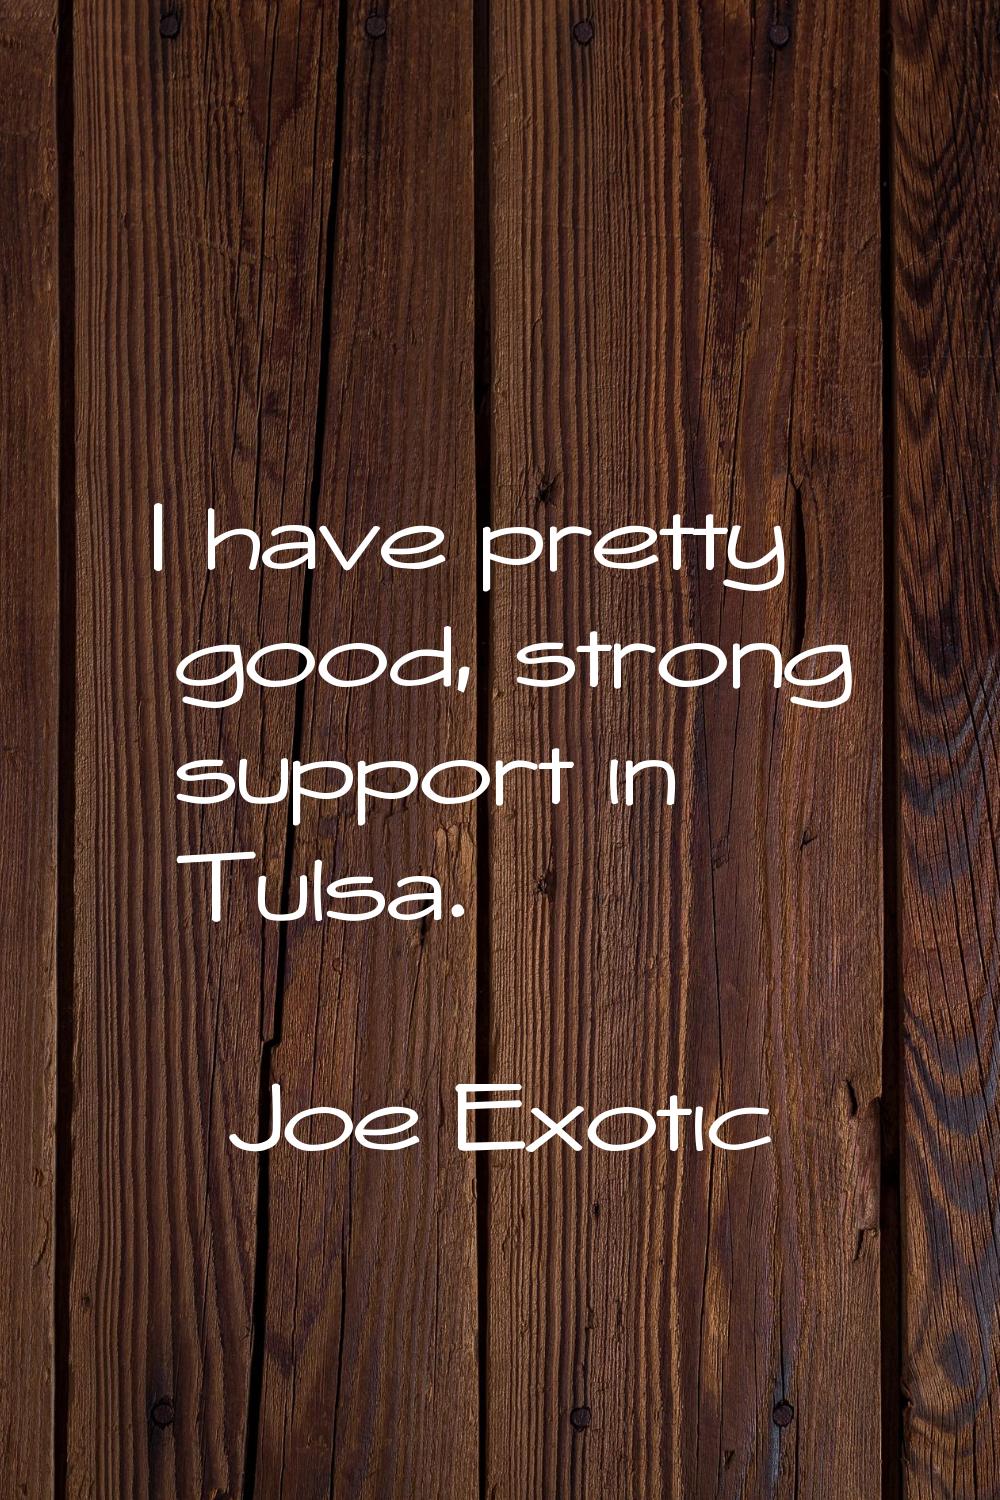 I have pretty good, strong support in Tulsa.